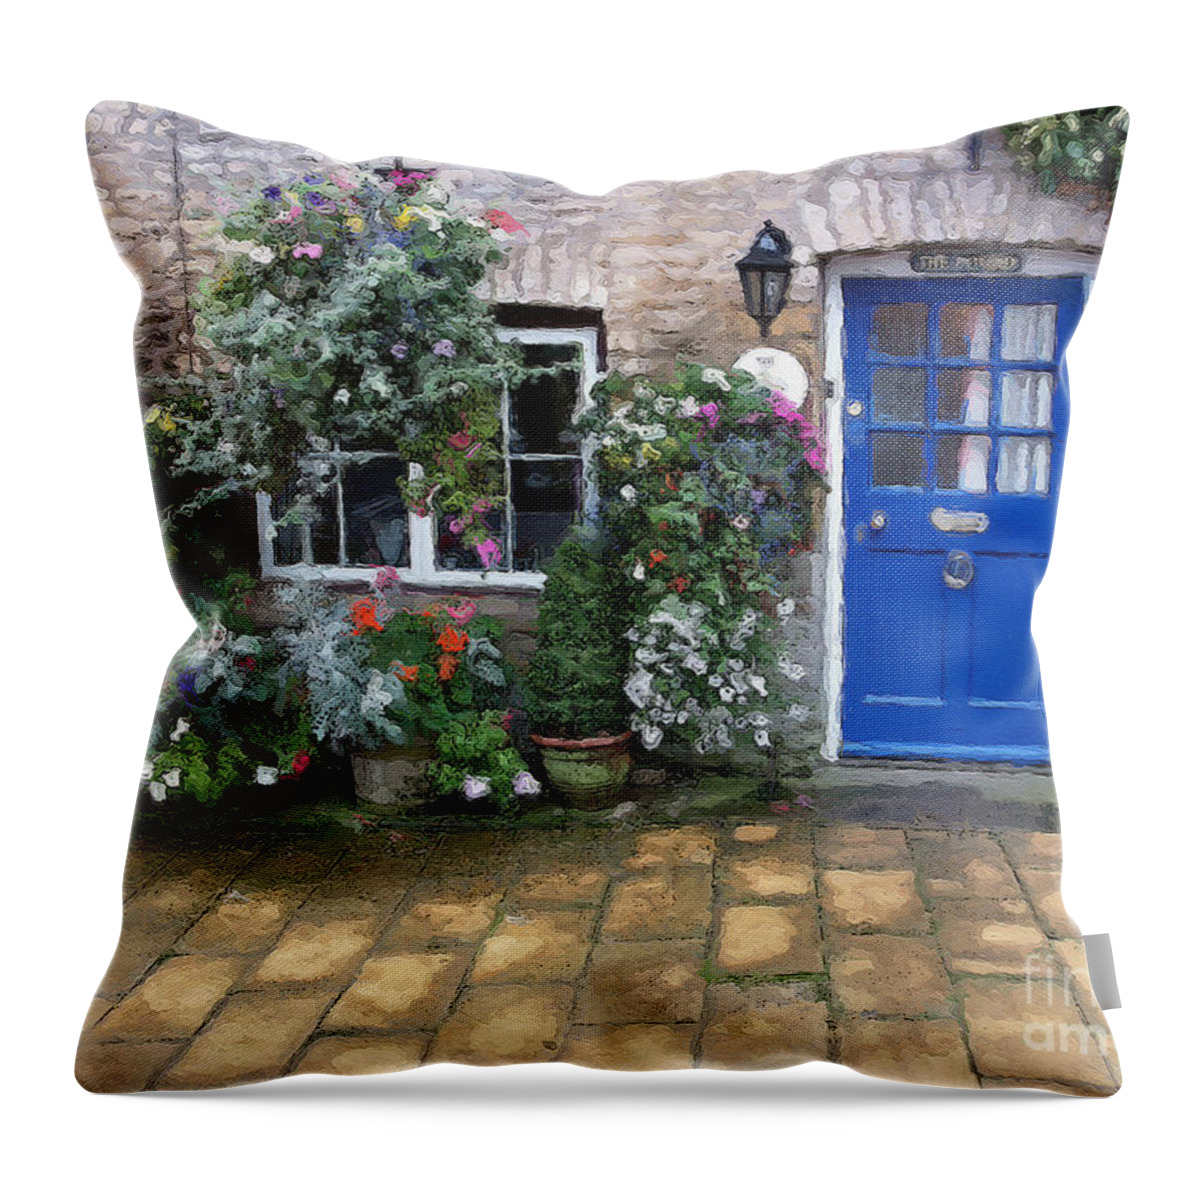 Stow-in-the-wold Throw Pillow featuring the photograph The Pound by Brian Watt